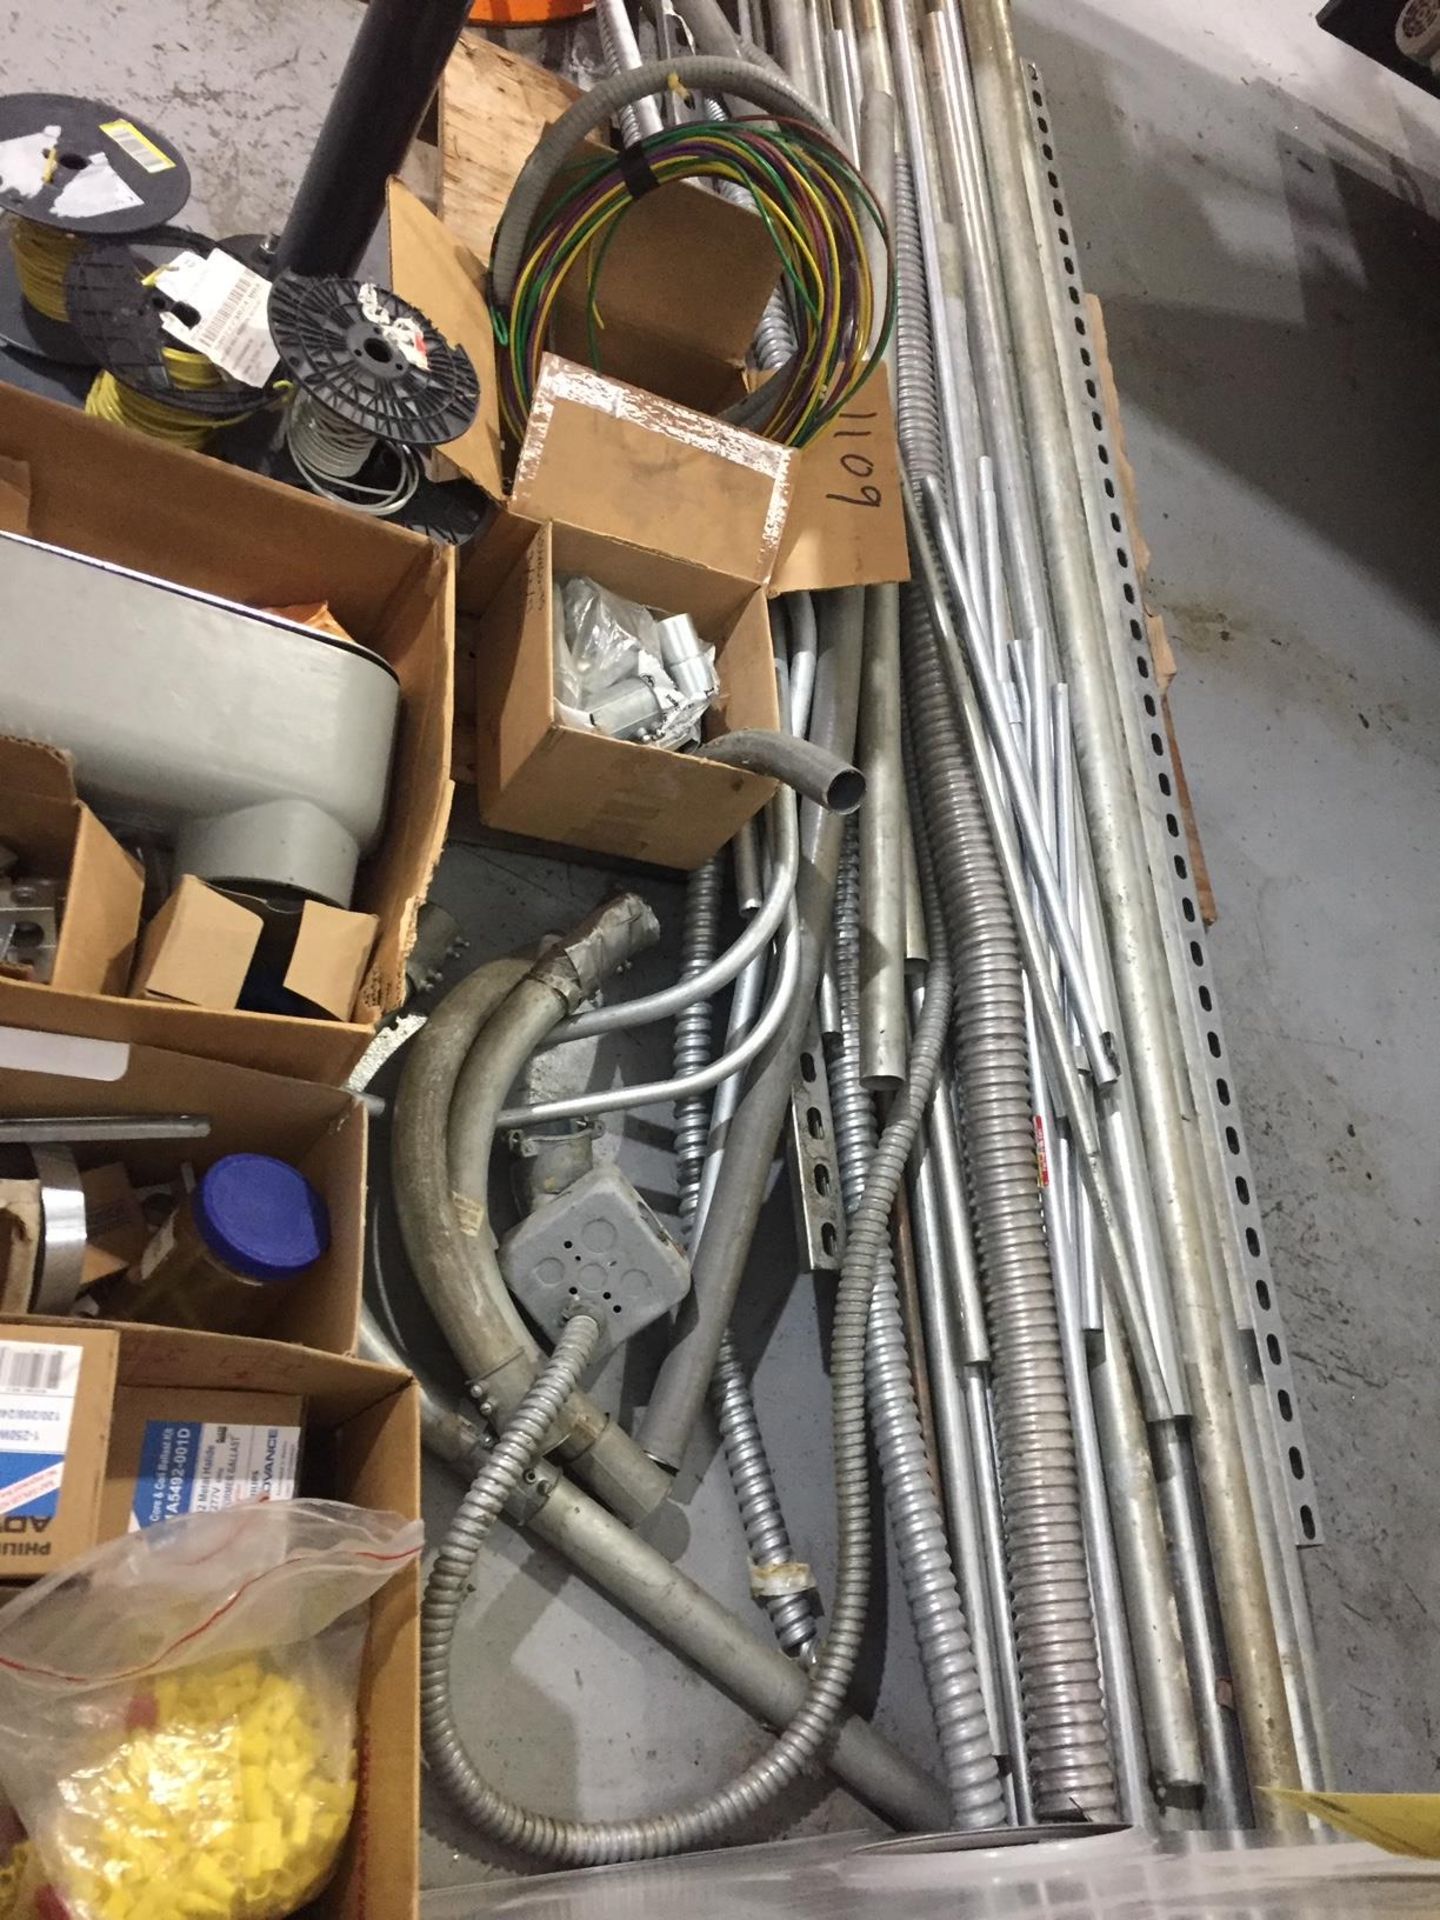 LOT CONSISTING OF ASSORTMENT OF ELECTRICAL BUILDING SUPPLIES - Image 5 of 5